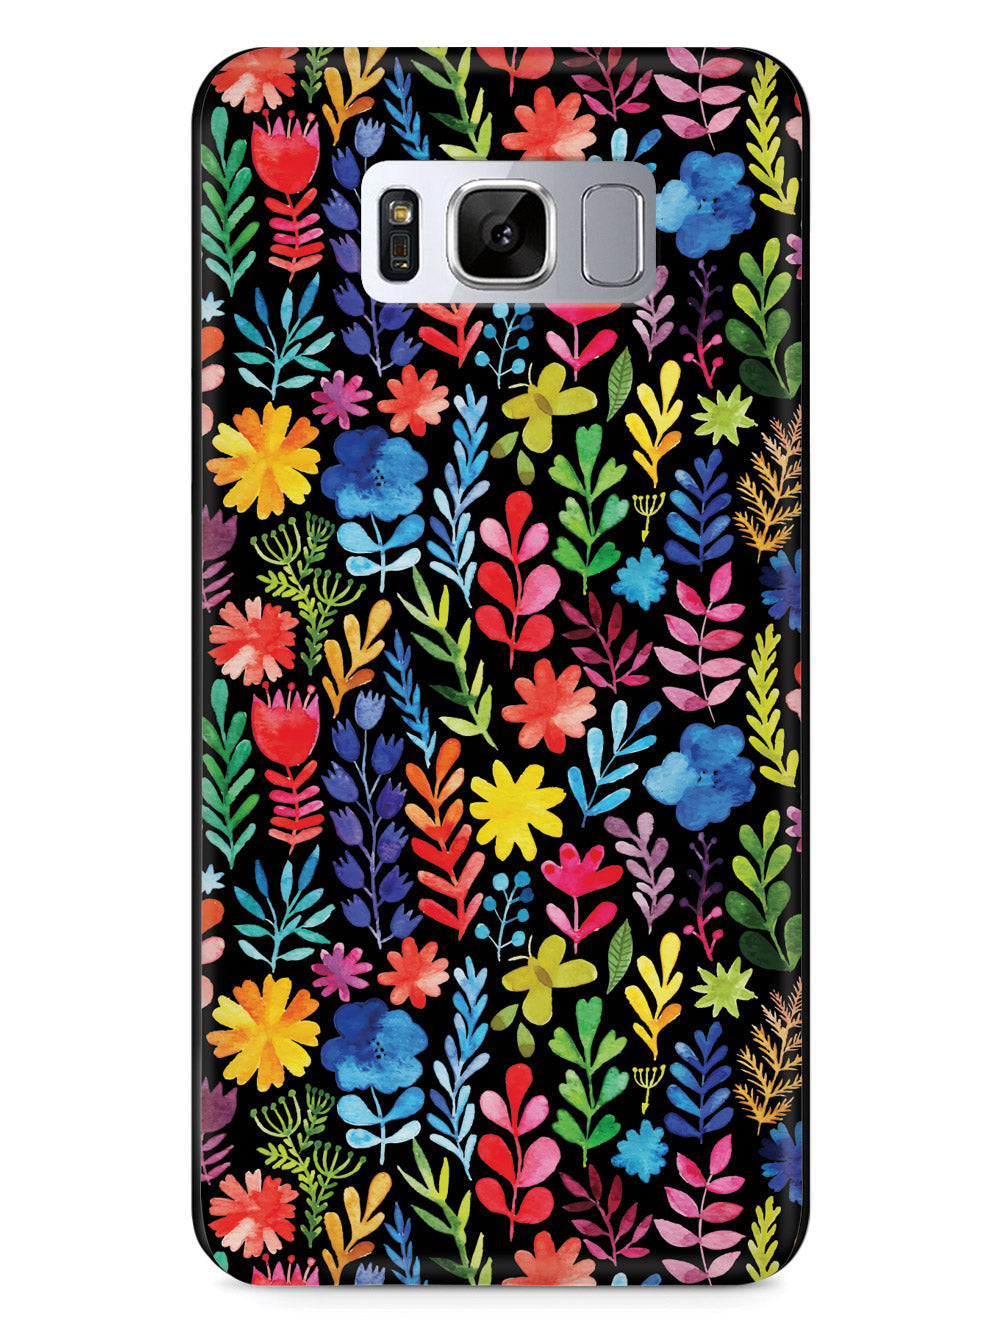 Bright And Colorful Watercolor Flowers - Black Case